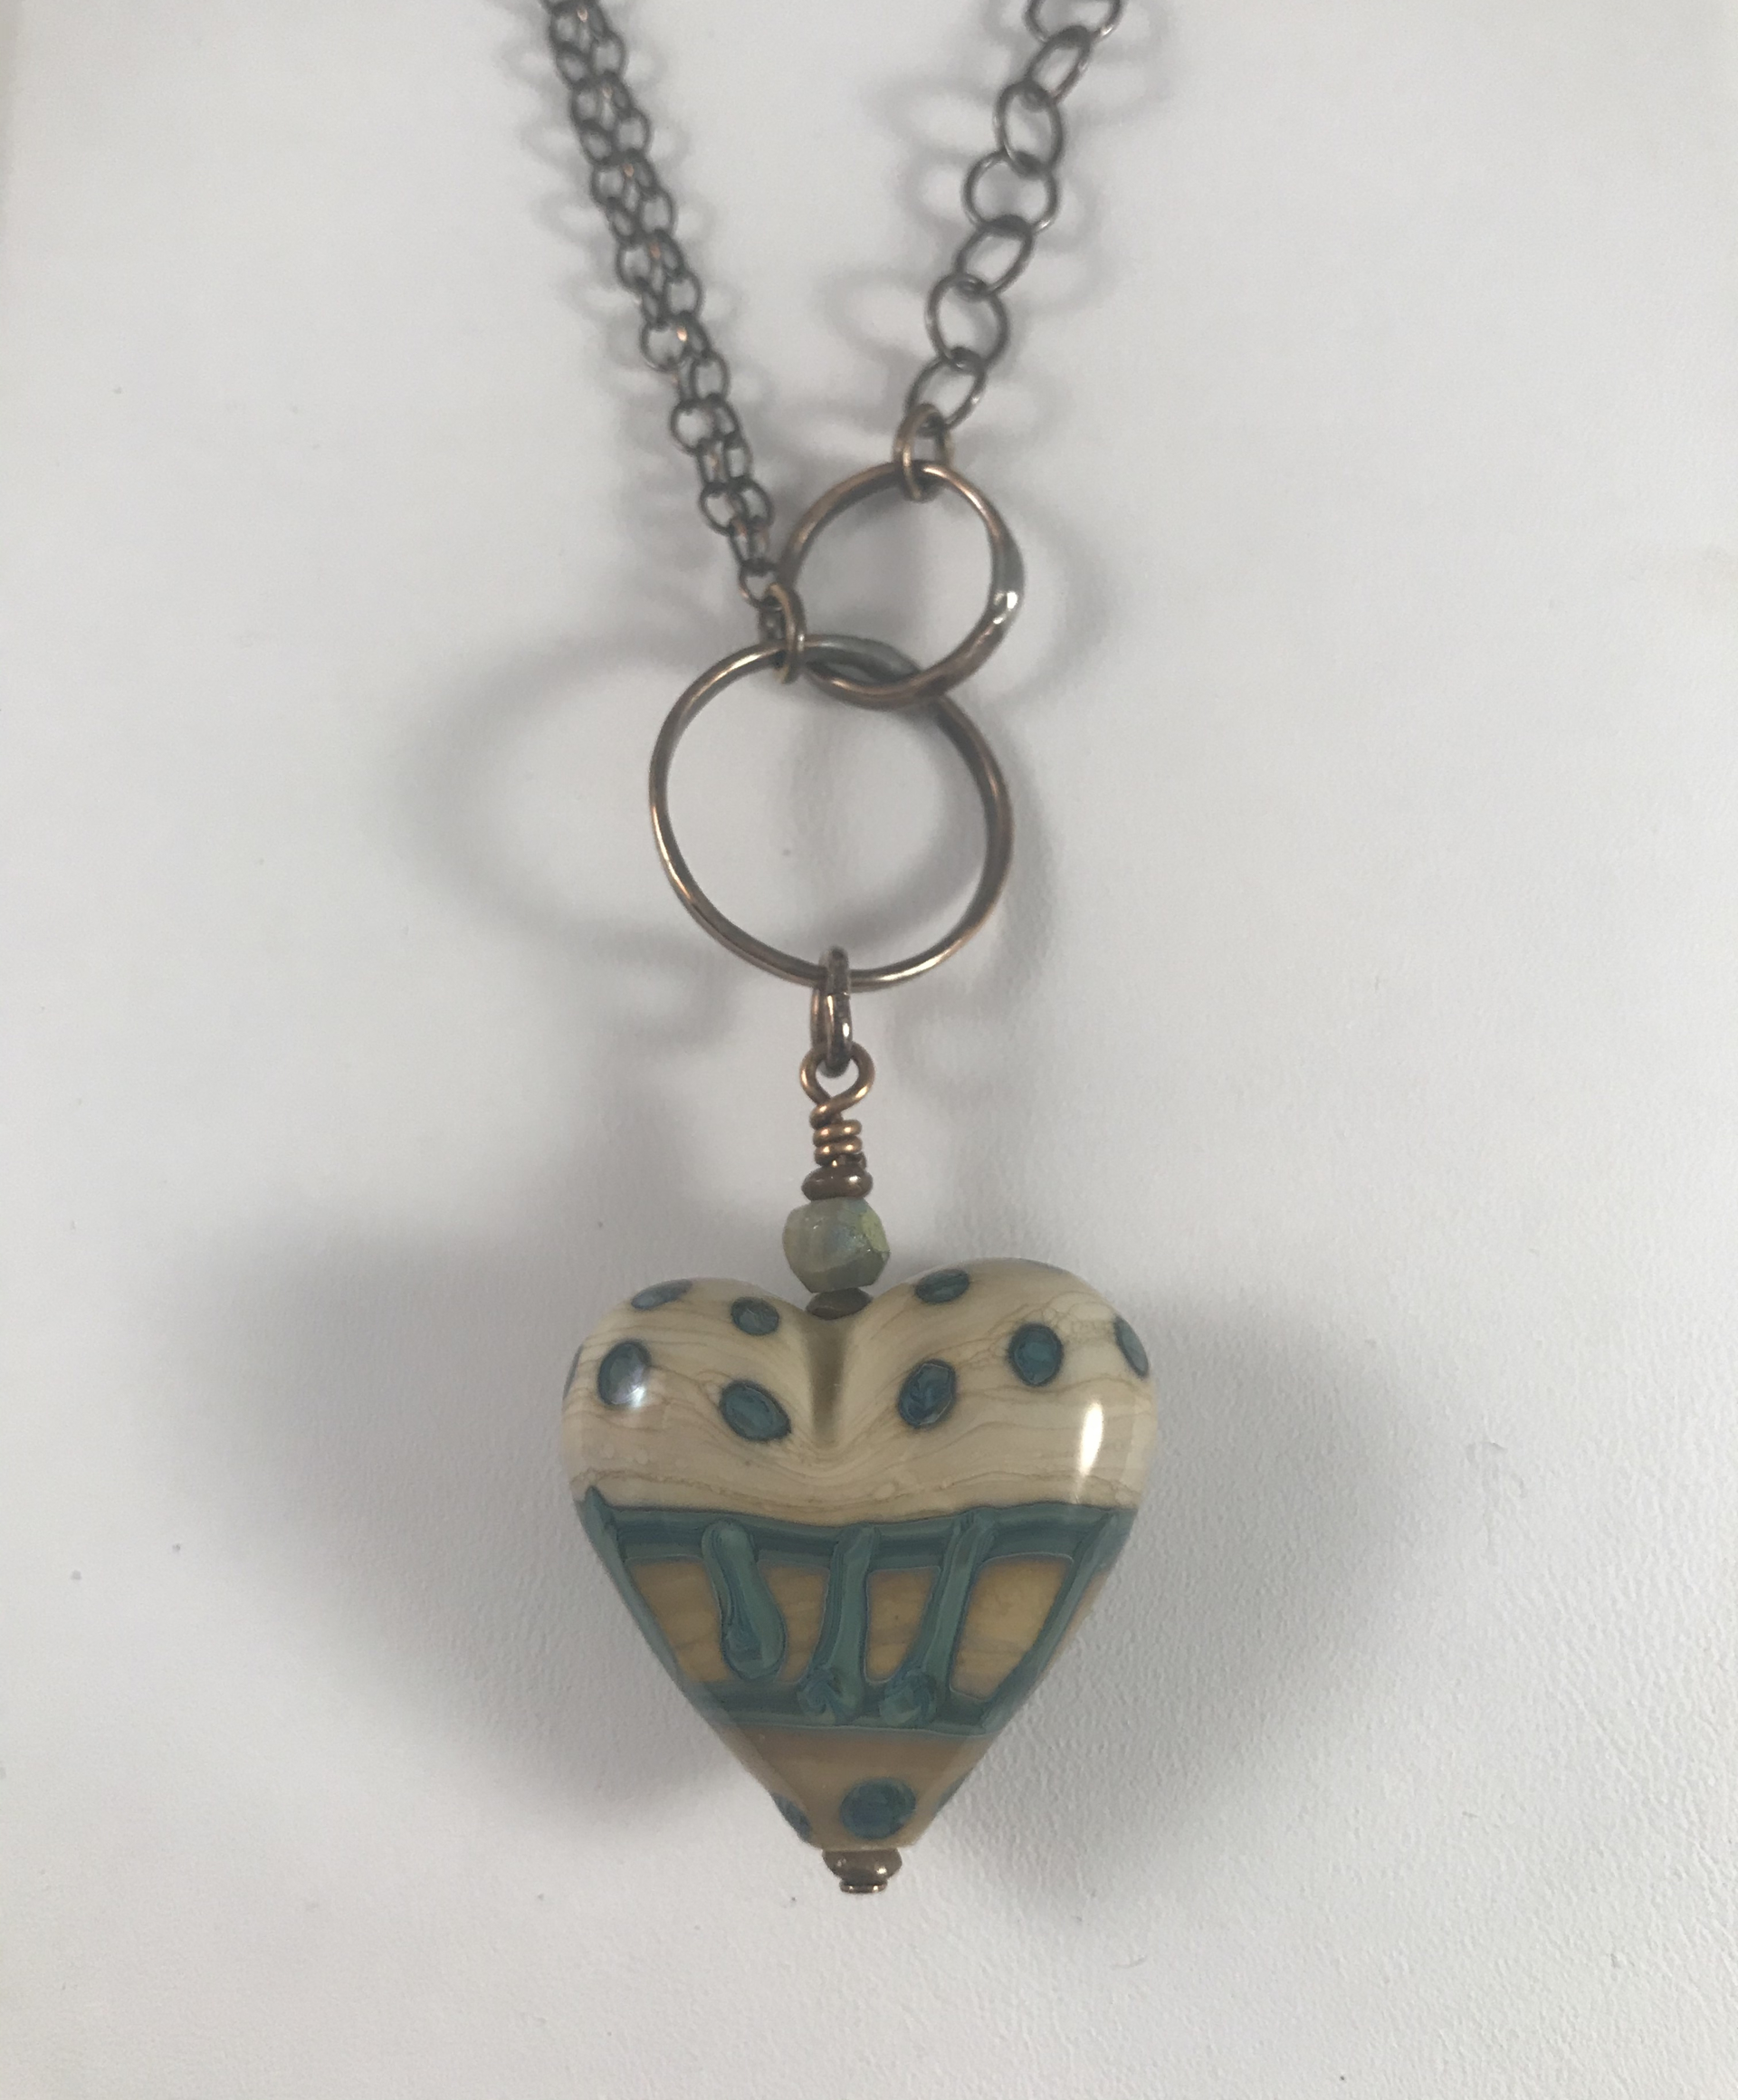 Ivory and Okanos Lampworked heart pendant on copper chain by Linda Sacra